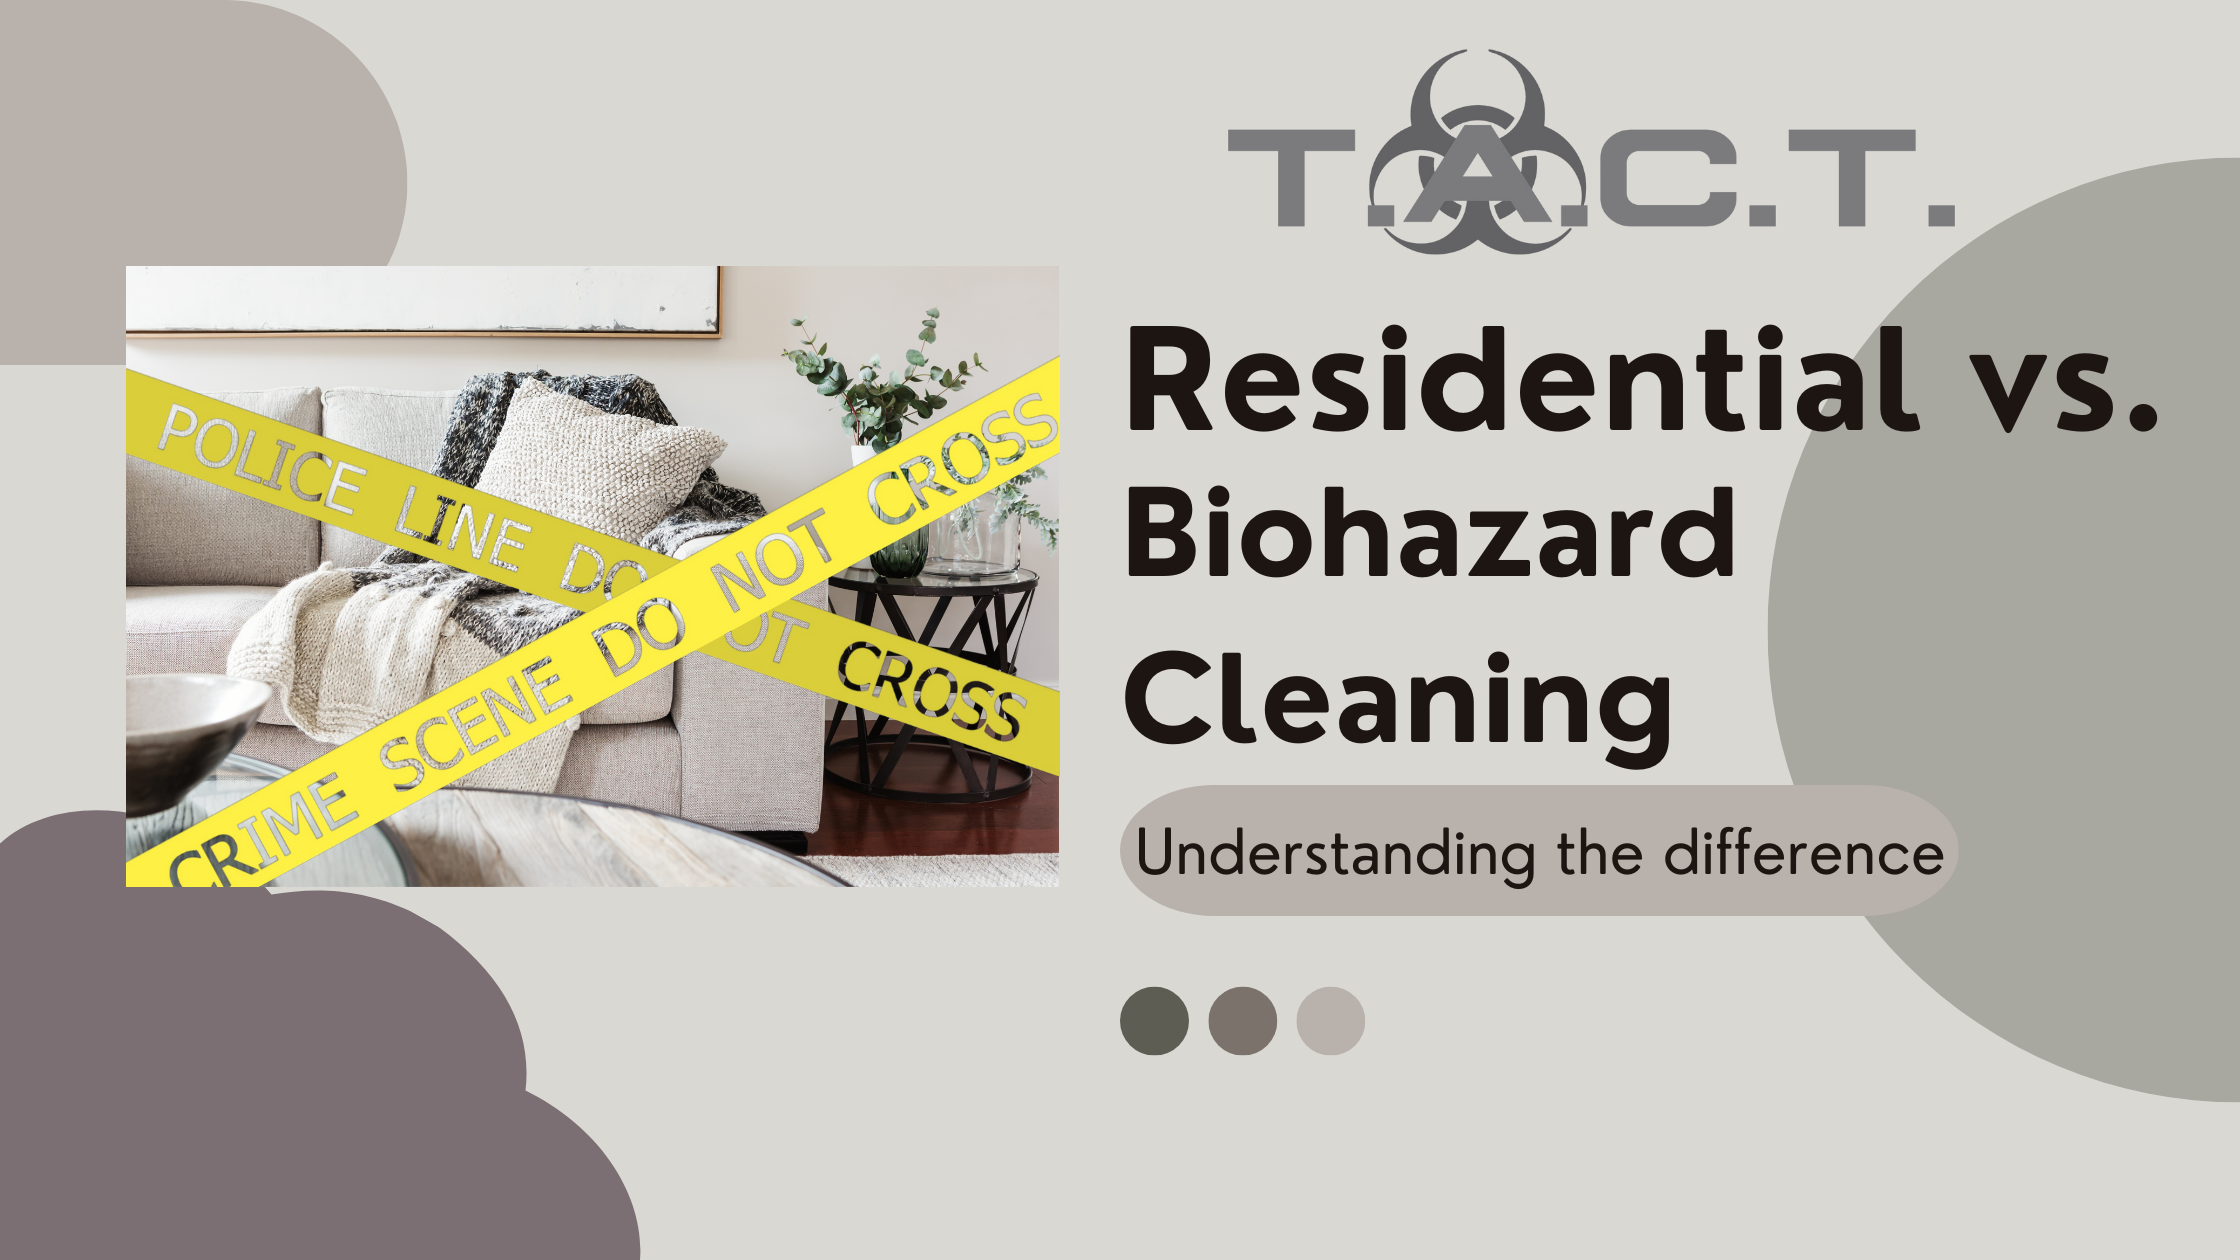 Residential Cleaning vs. Biohazard Cleaning: Understanding the Differences